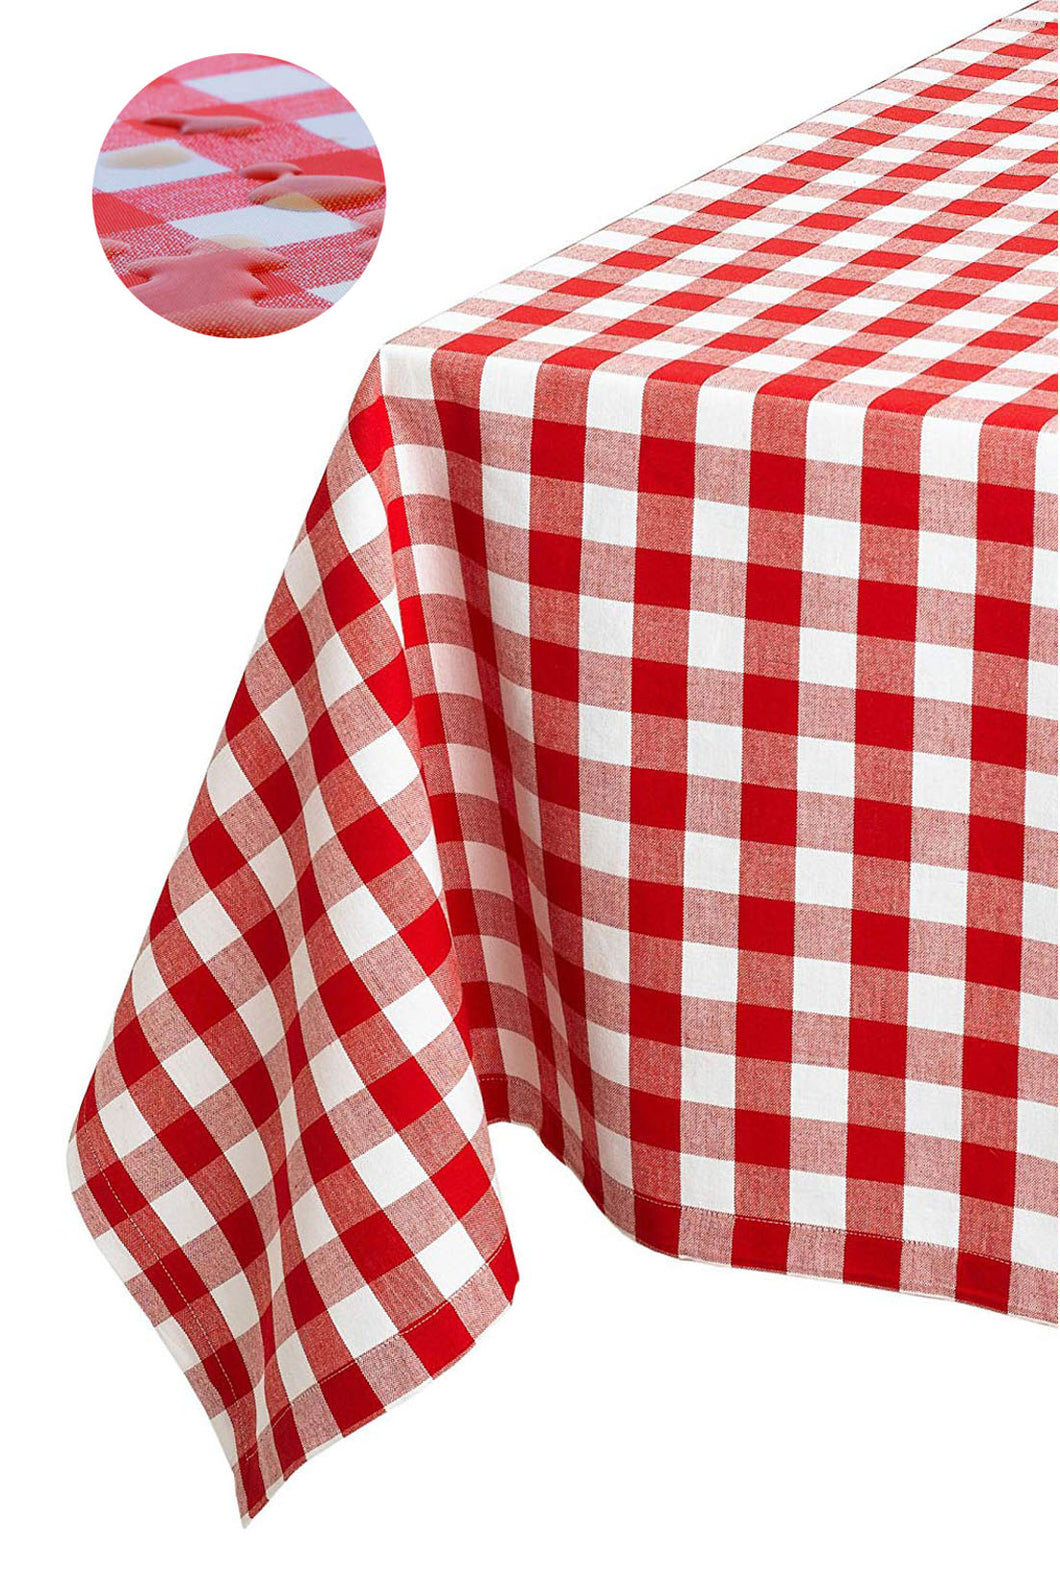 Tektrum Waterproof Square/Rectangular Checker Checkered Tablecloth Table Cover -Spill Proof/Stain Resistant/Wrinkle Free-for Camping Picnic, Dinner, Restaurant (Red and White)